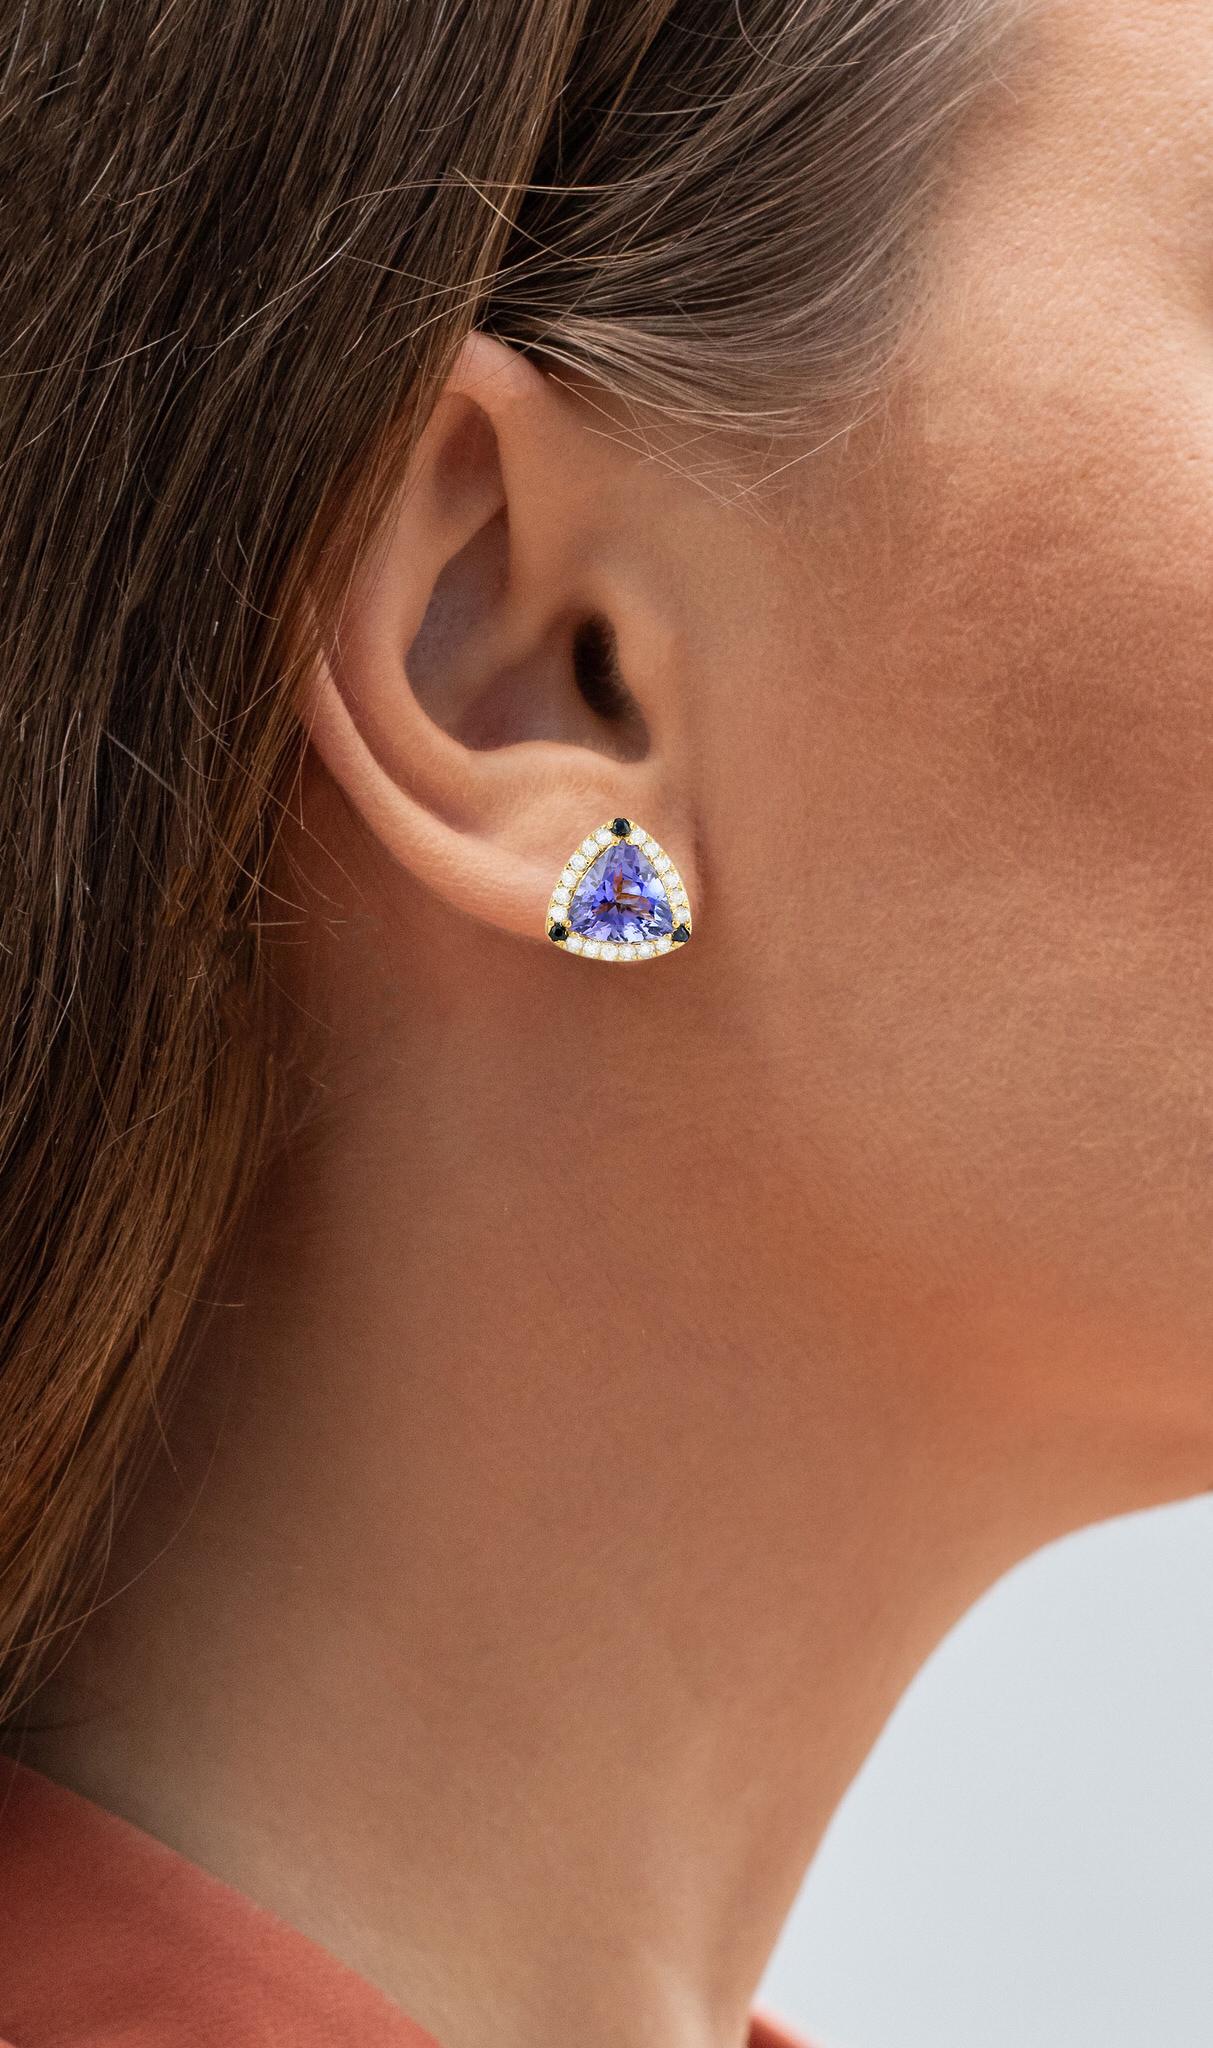 It comes with the Gemological Appraisal by GIA GG/AJP
All Gemstones are Natural
Tanzanites = 2.30 Carats
Blue Sapphires = 0.14 Carats
Diamonds = 0.26 Carats
Metal: 14K Yellow Gold
Dimensions: 10 x 10 mm
